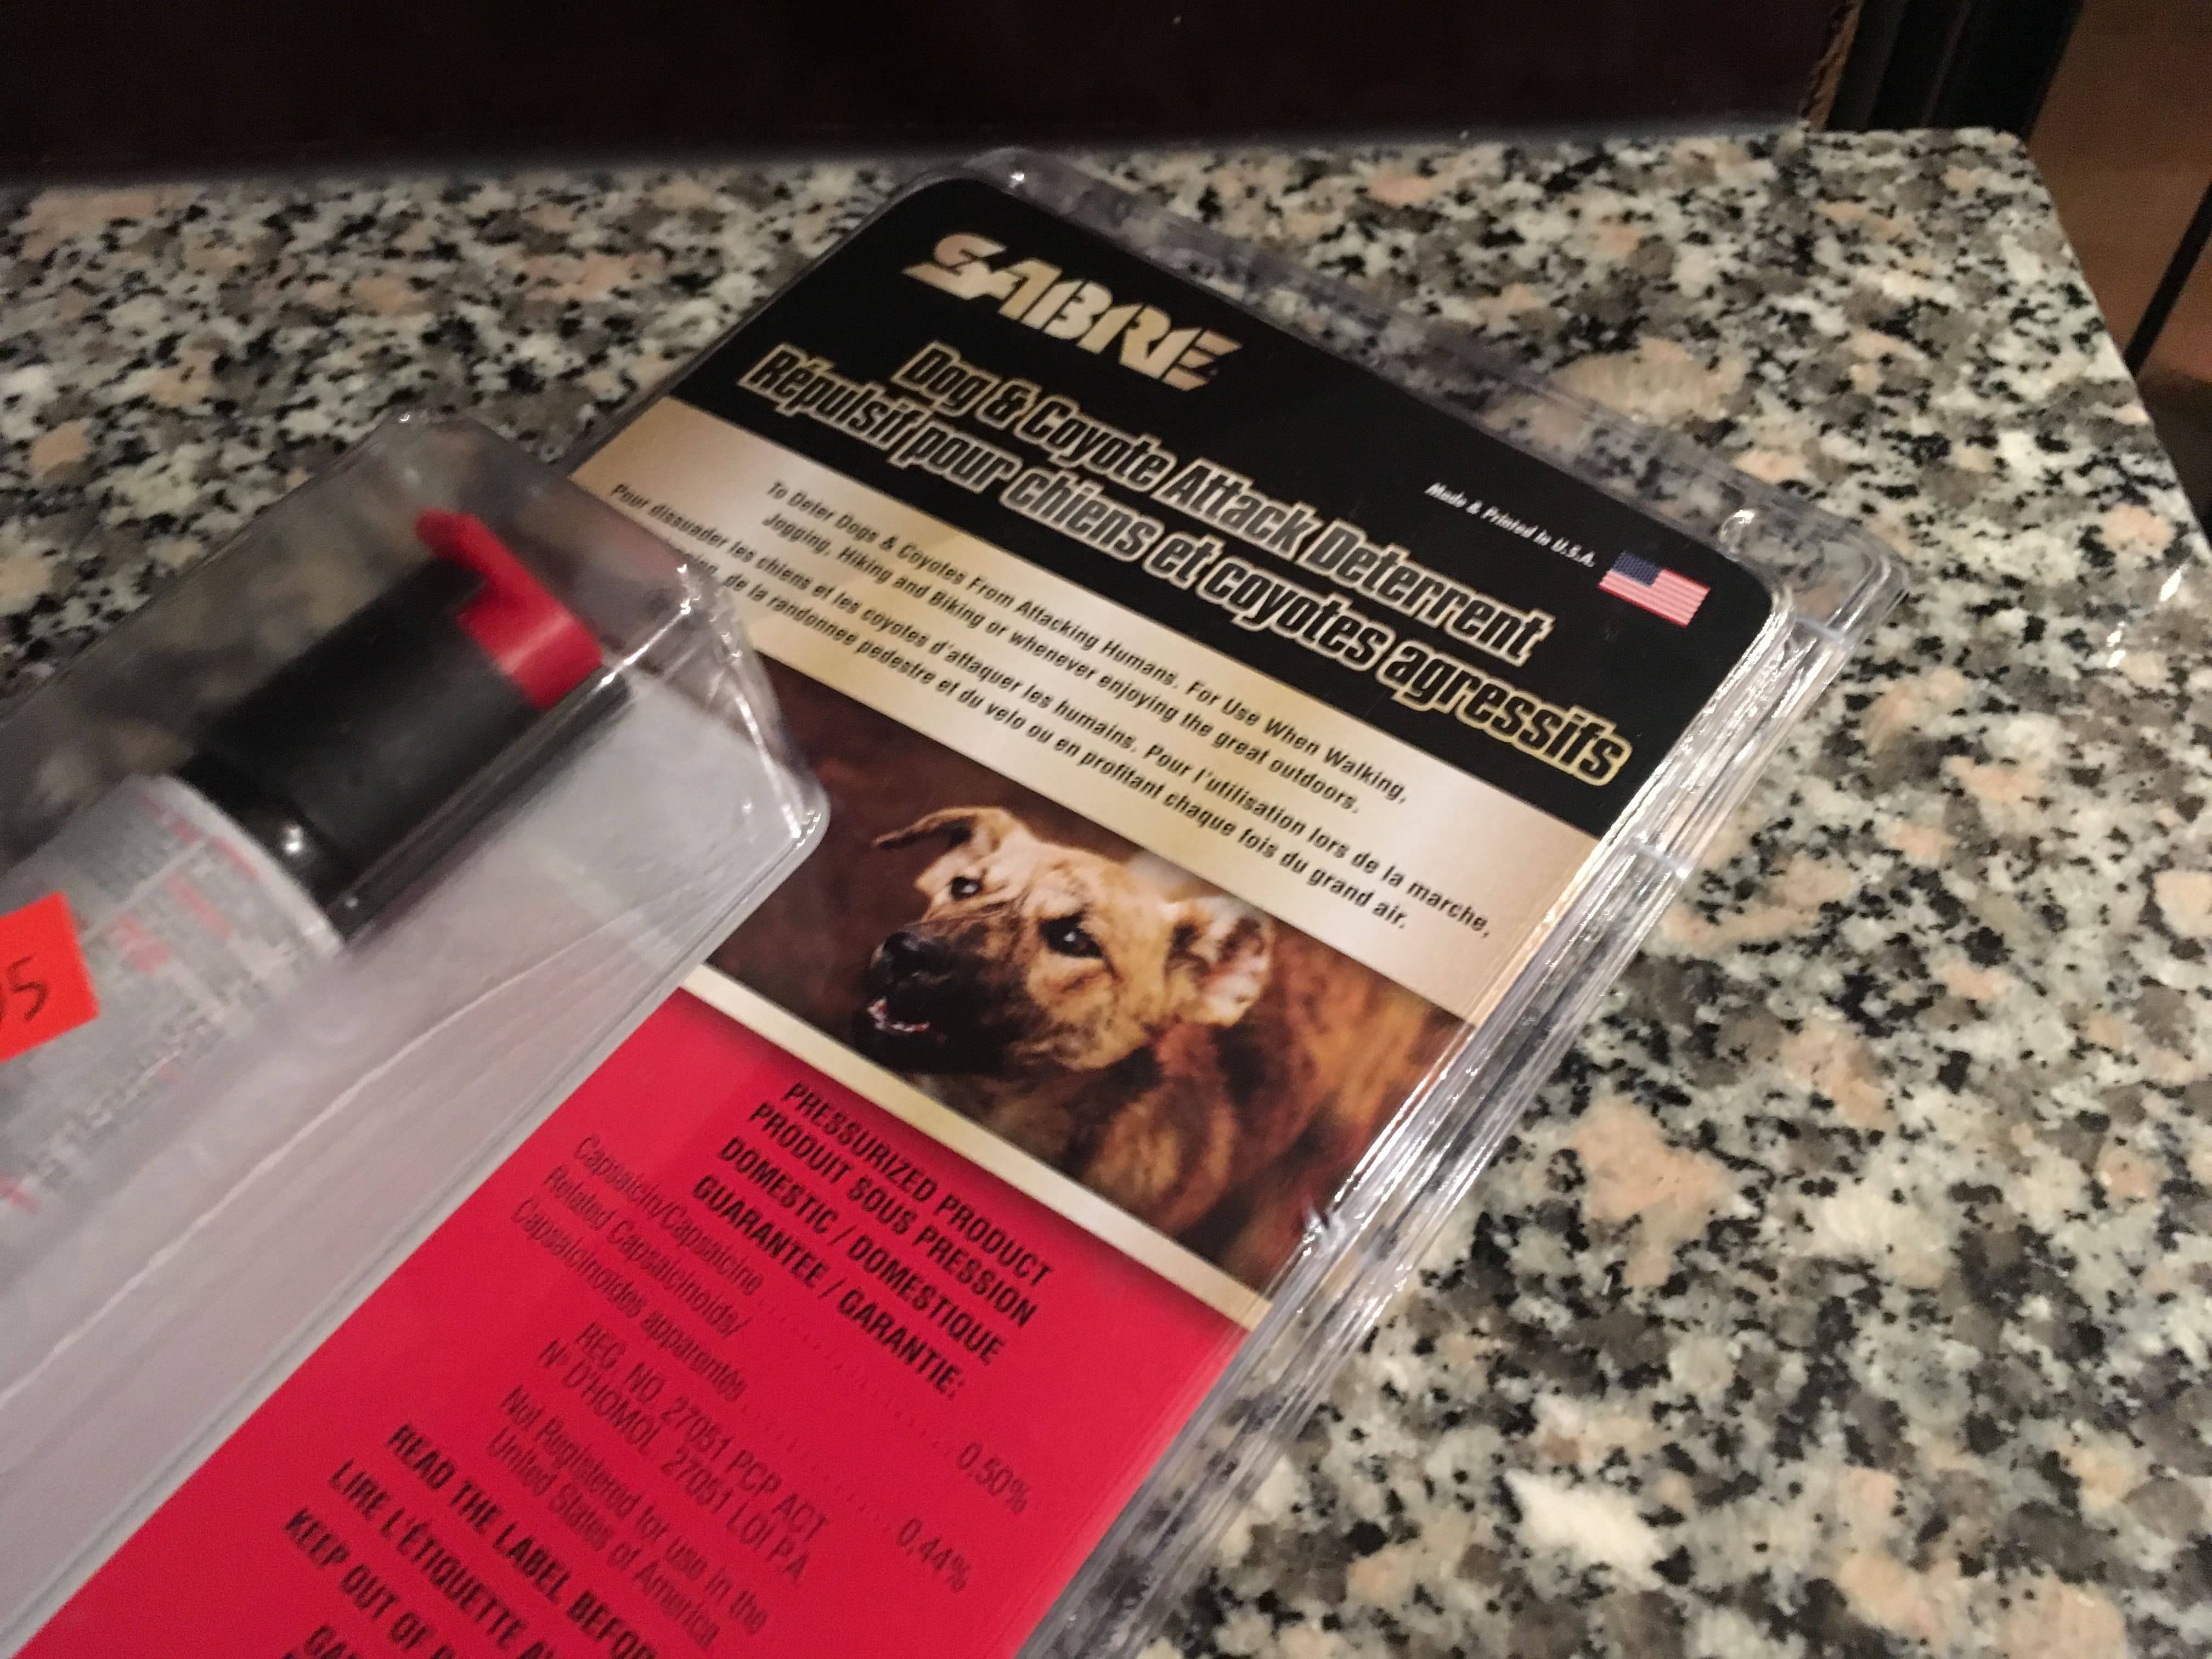 Pepper spray is called "coyote and dog deterrent" in Canadian stores. This week, my girlfriend got hers.